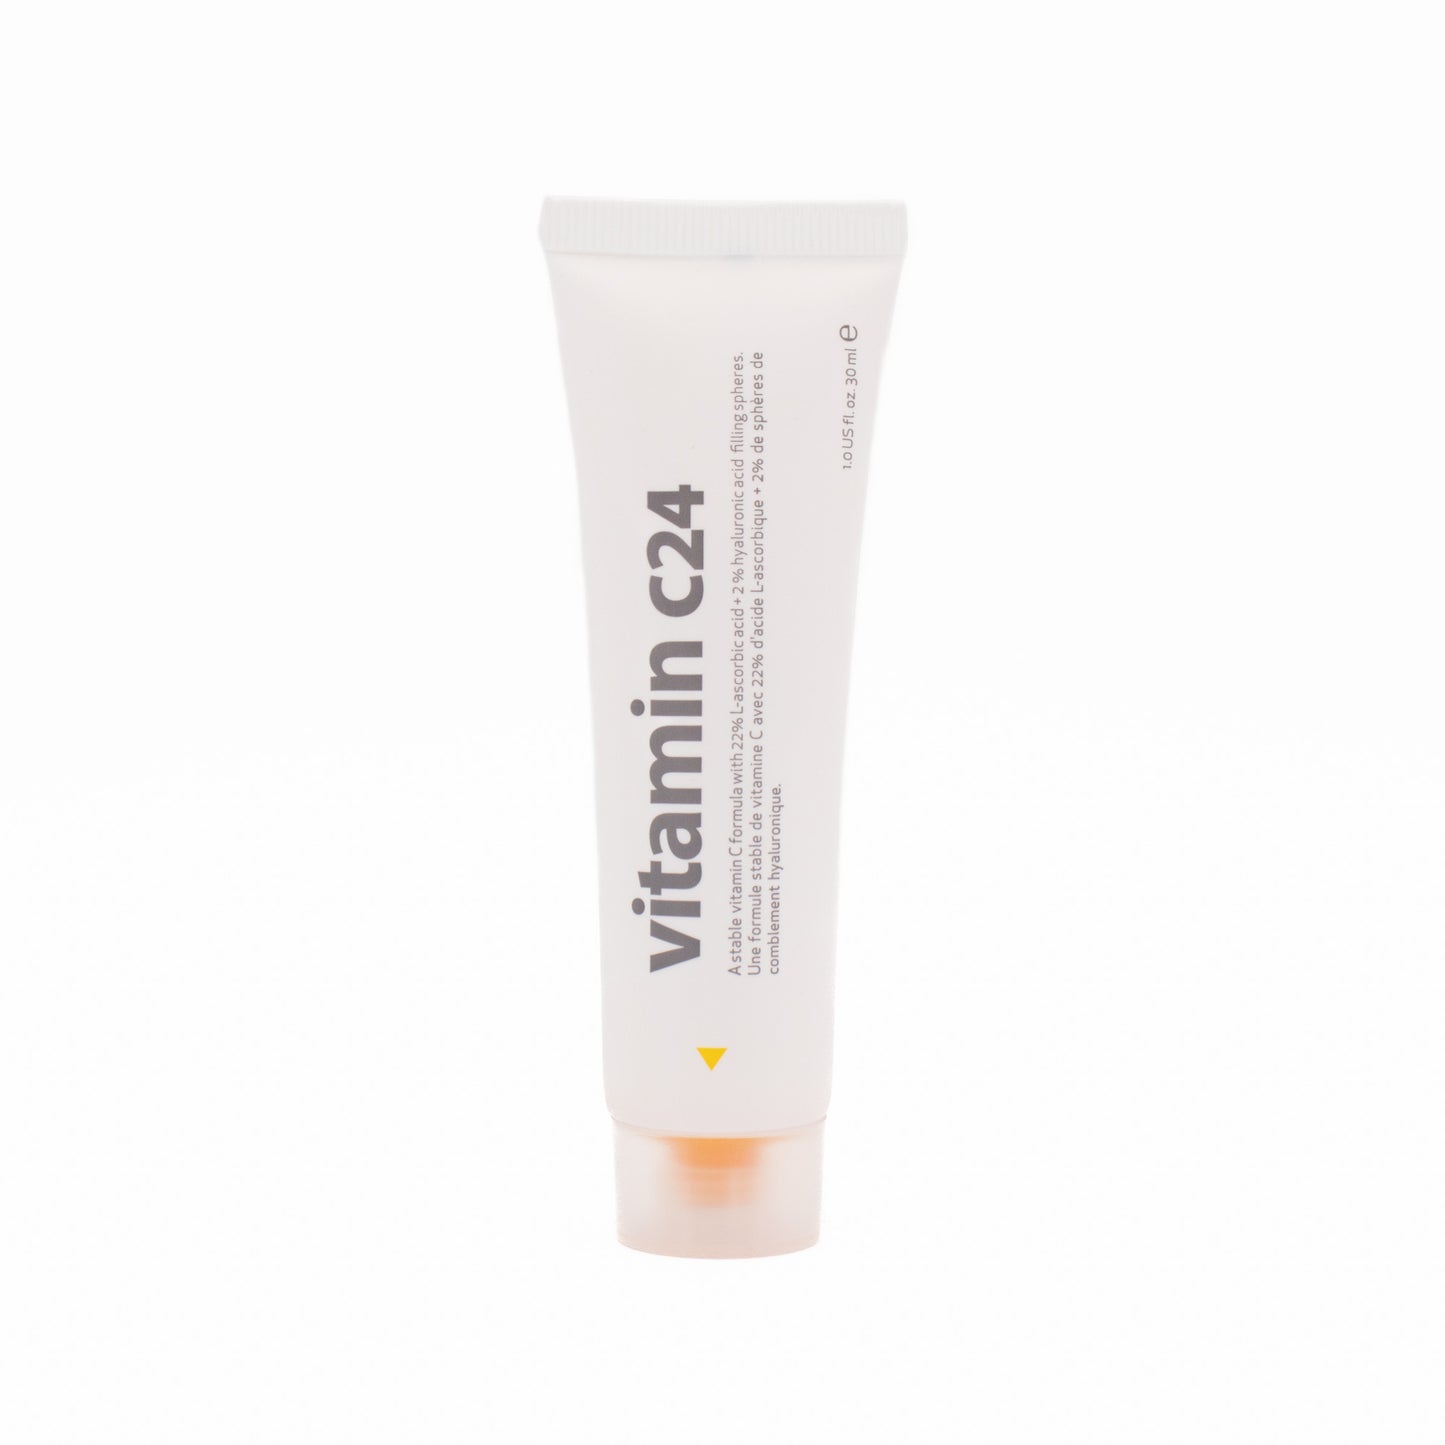 Indeed Laboratories Vitamin c24 30ml - Missing Box - This is Beauty UK